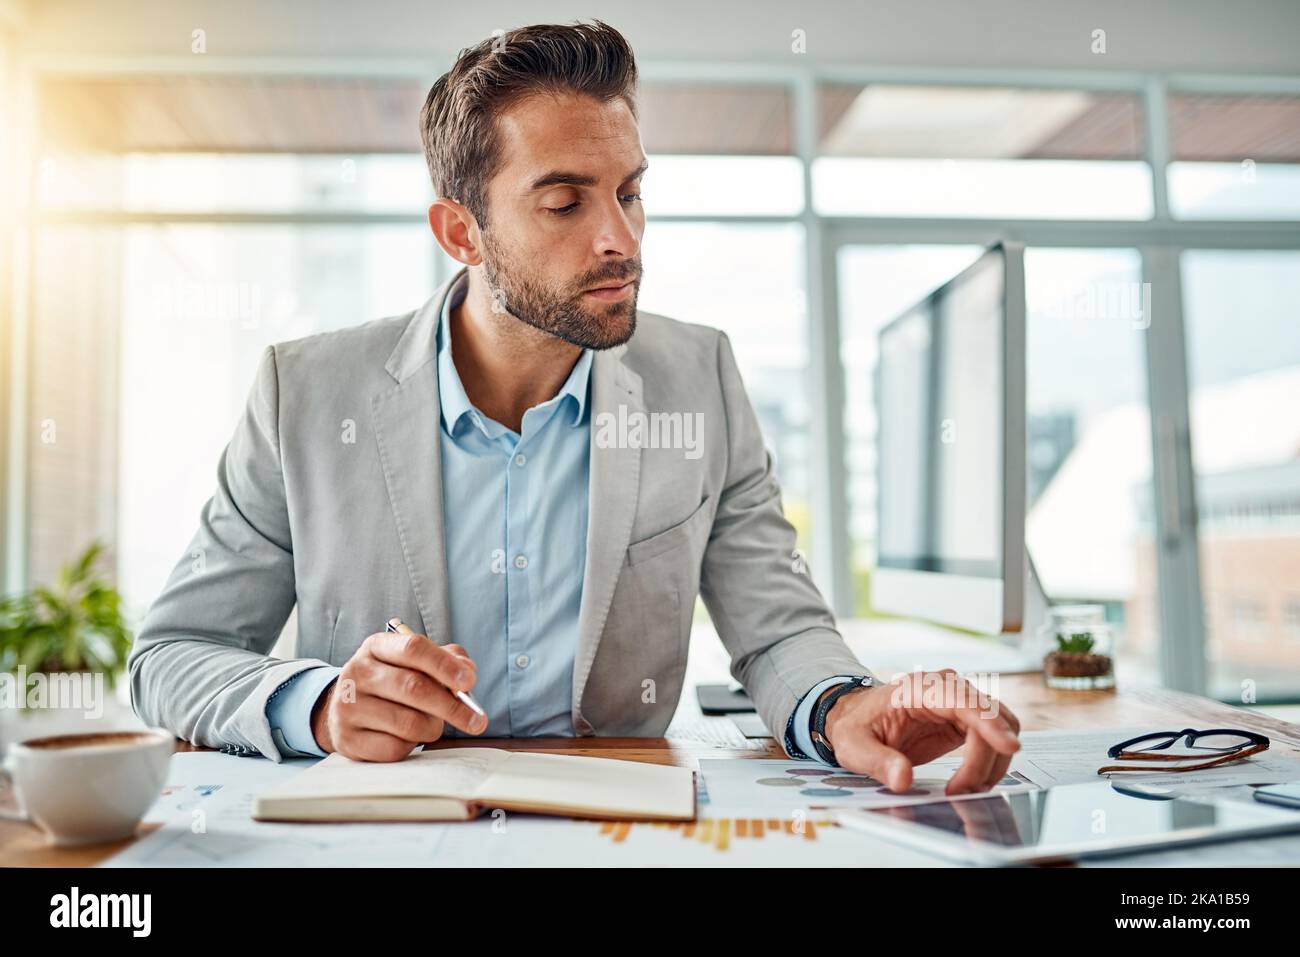 Making success happen. a handsome young businessman writing notes while using a digital tablet in an office. Stock Photo